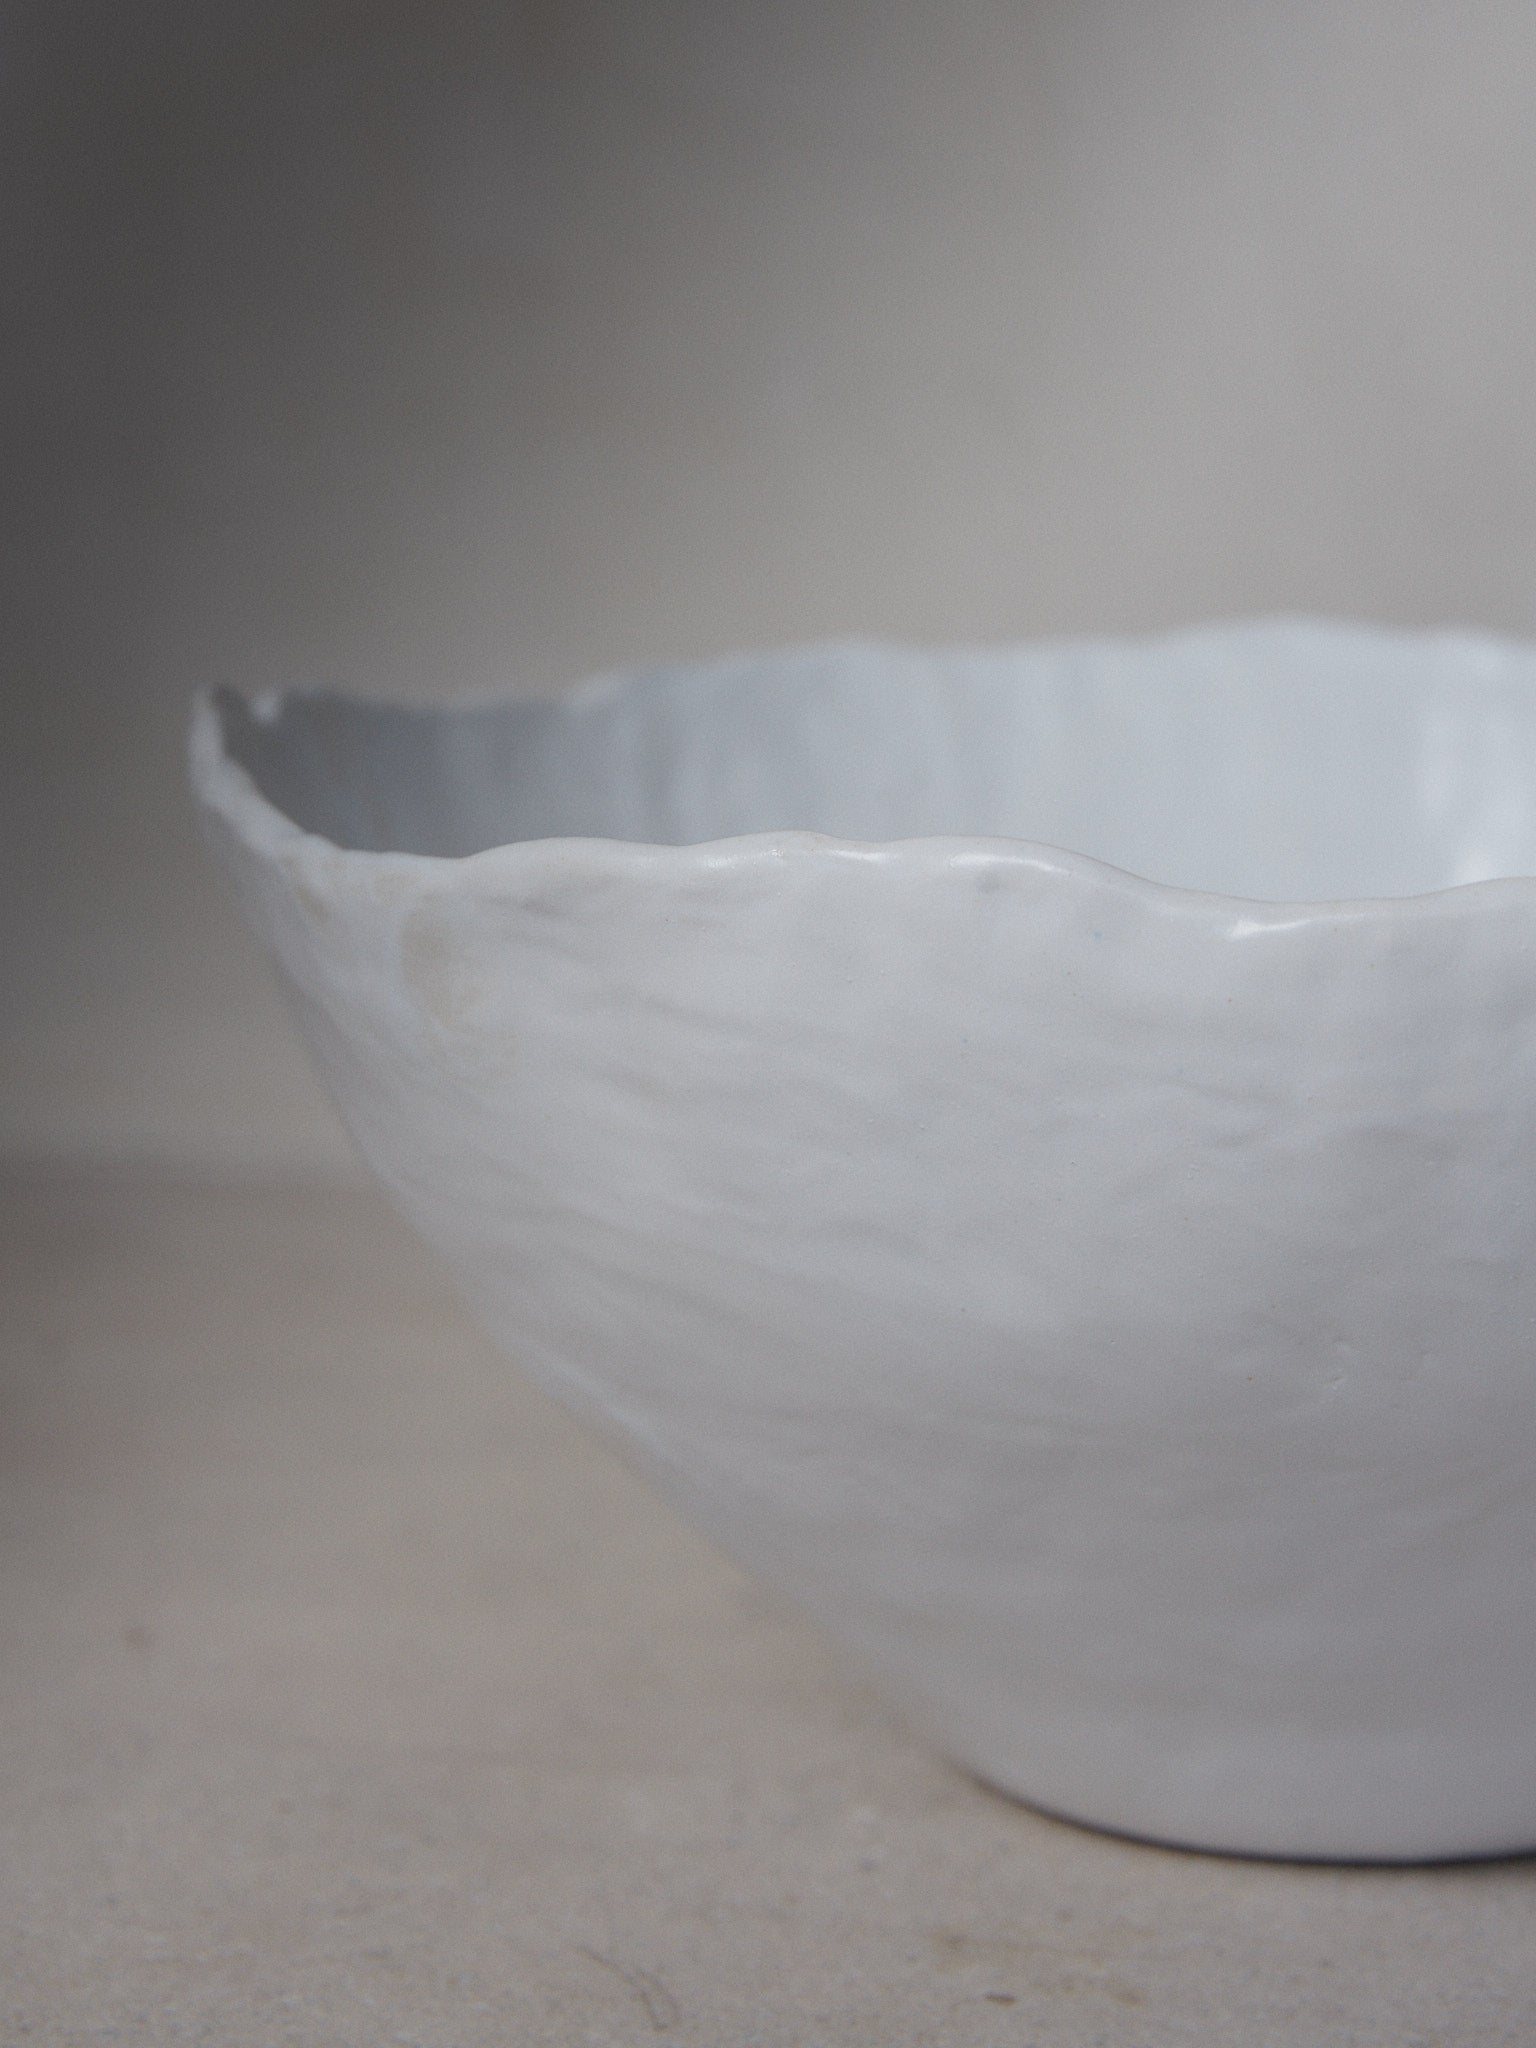 XL Raw Bowl. Exclusively ours. Timelessly elegant, oversize, ceramic bowl with subtly irregular edges revealing the touch of the artist's hand in classic matte white stoneware.